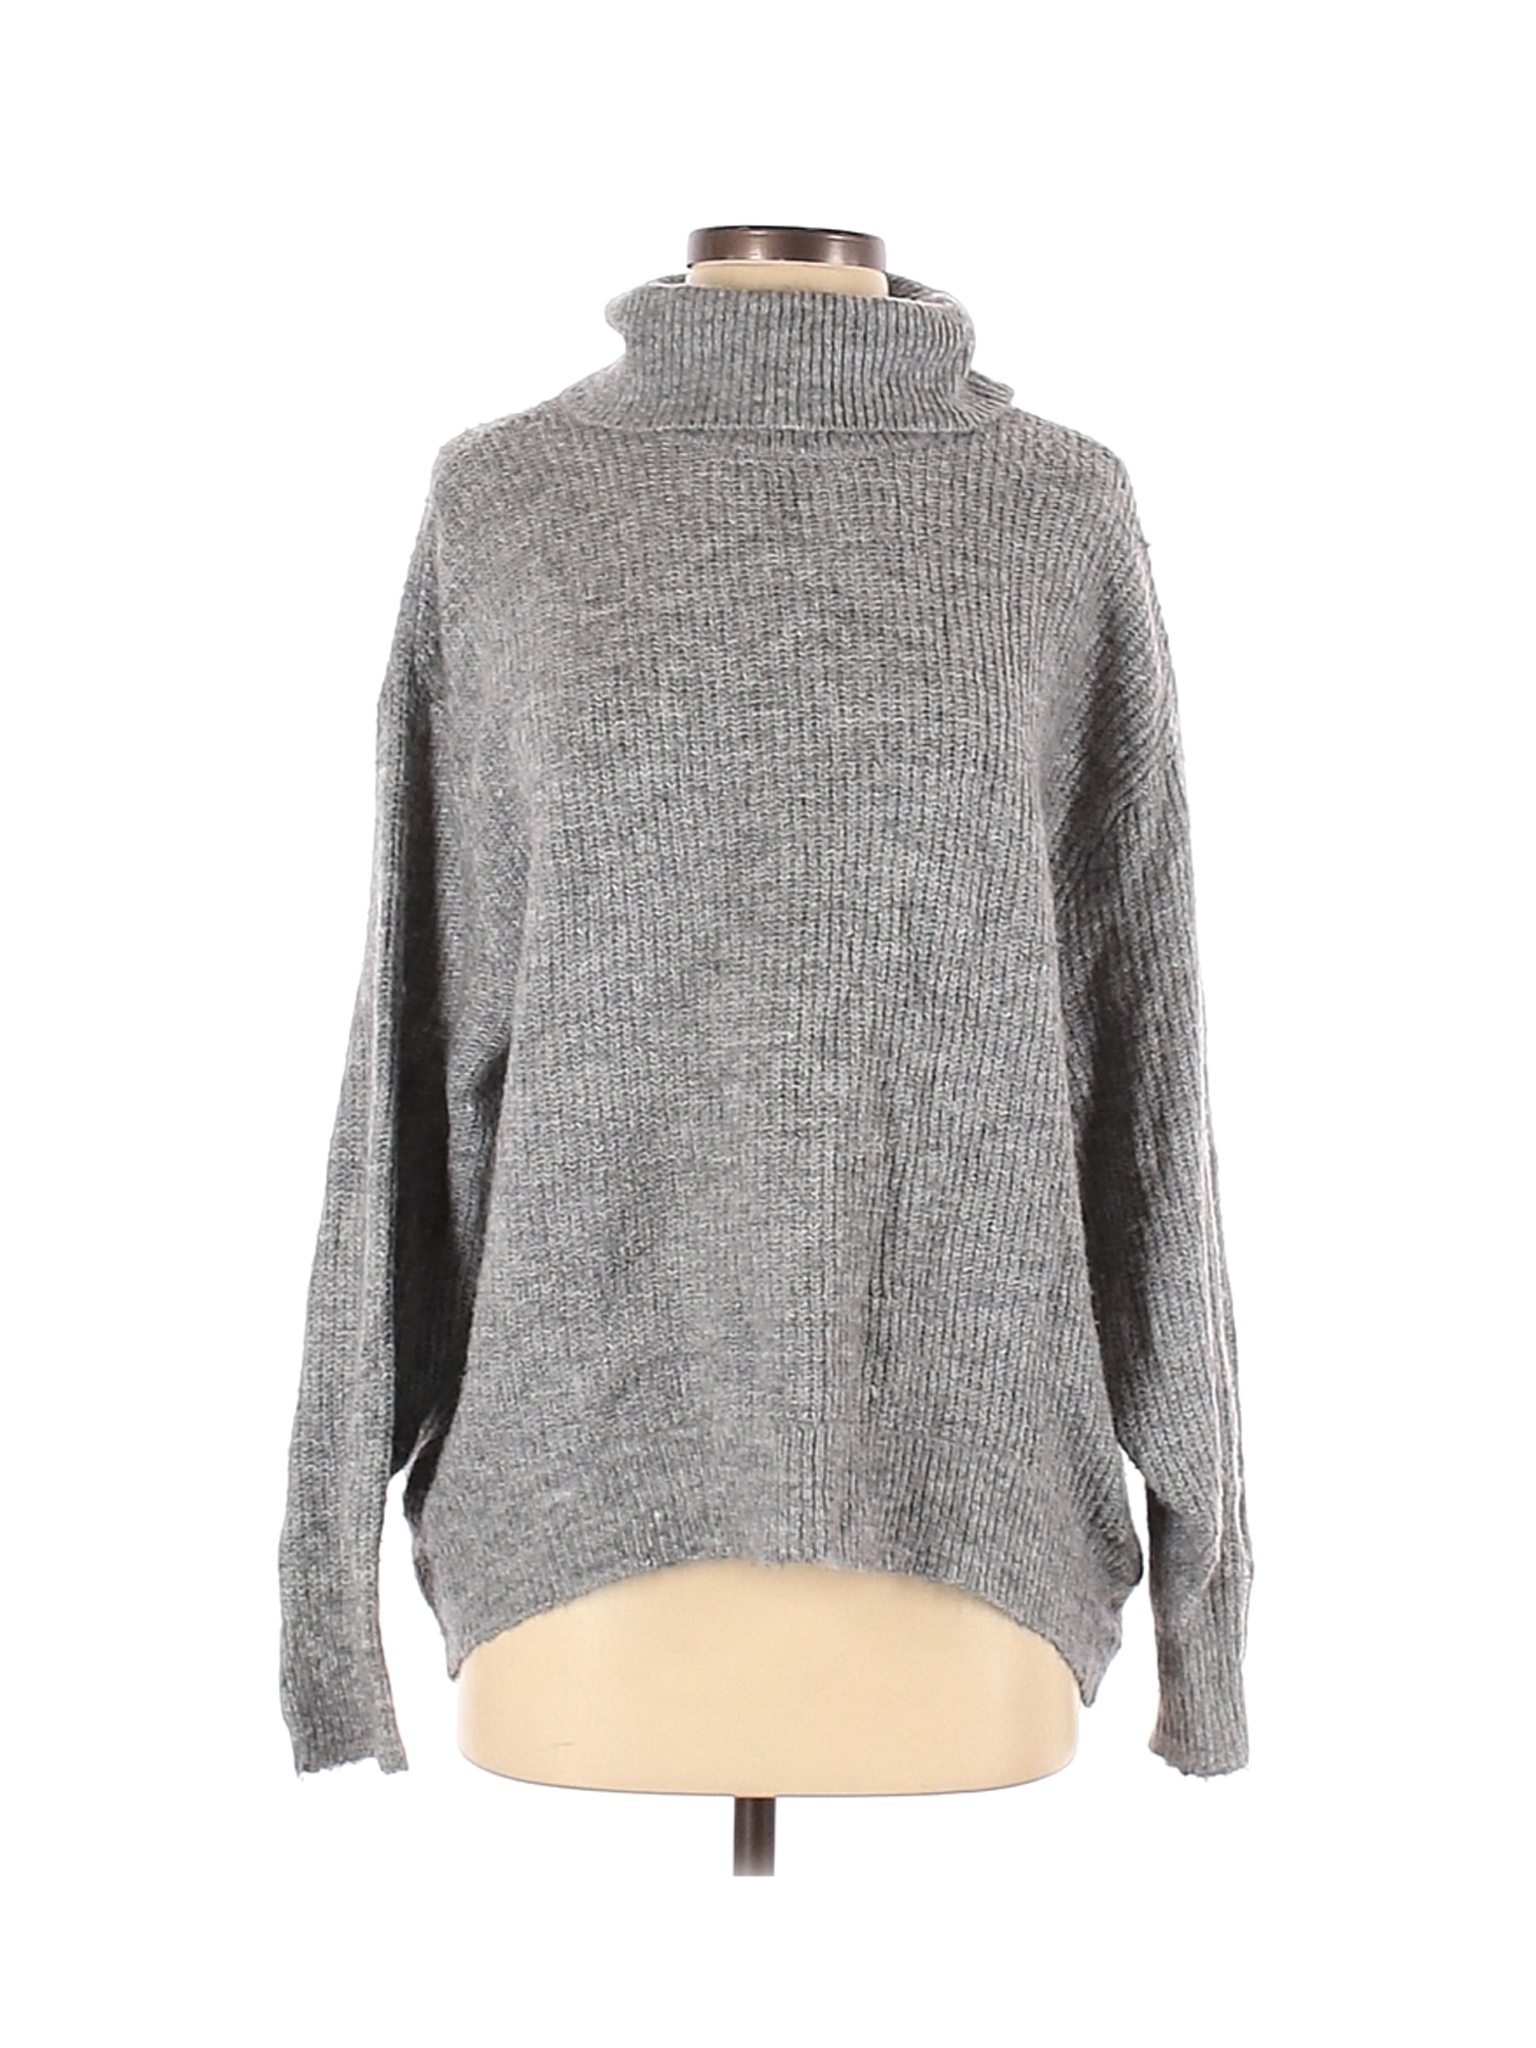 Divided by H&M Women Gray Pullover Sweater XS | eBay